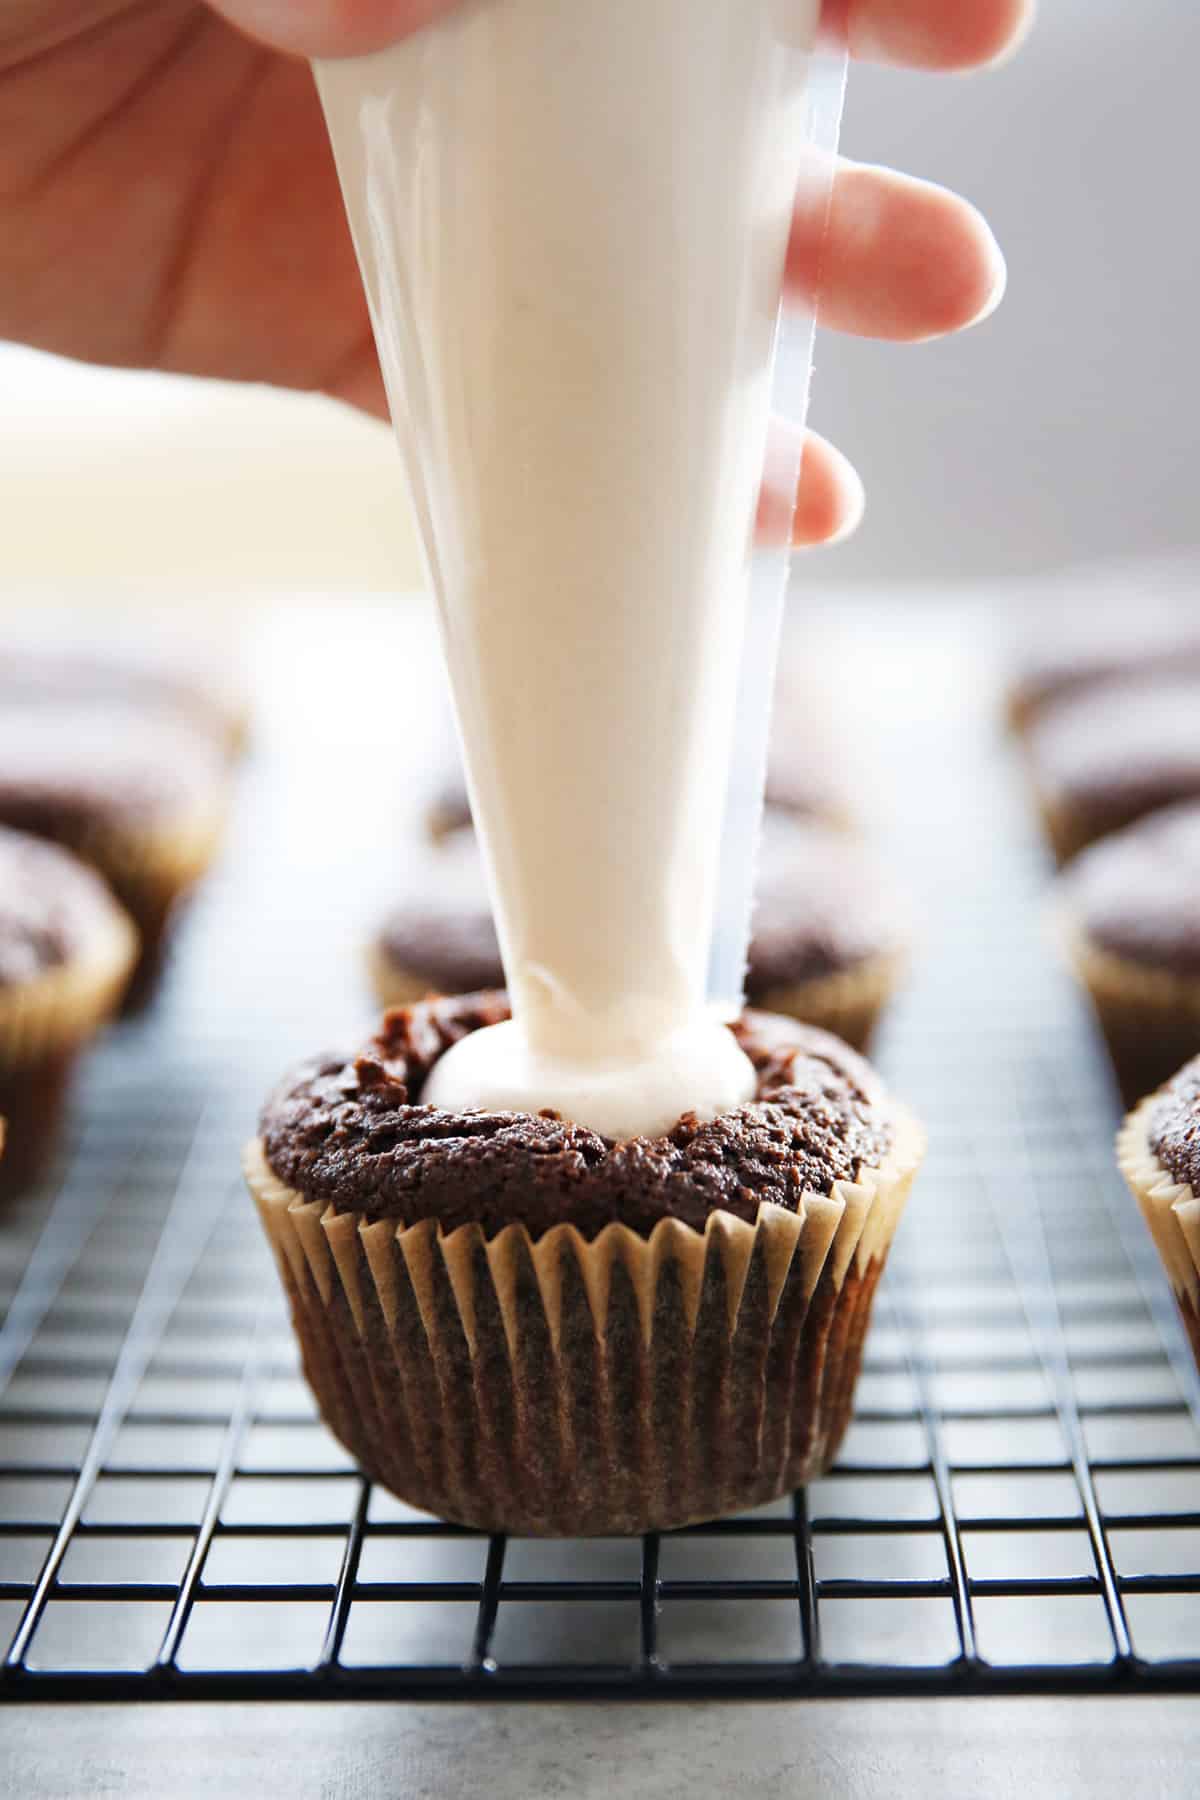 a chocolate cupcake being filled with marshmallow cream.